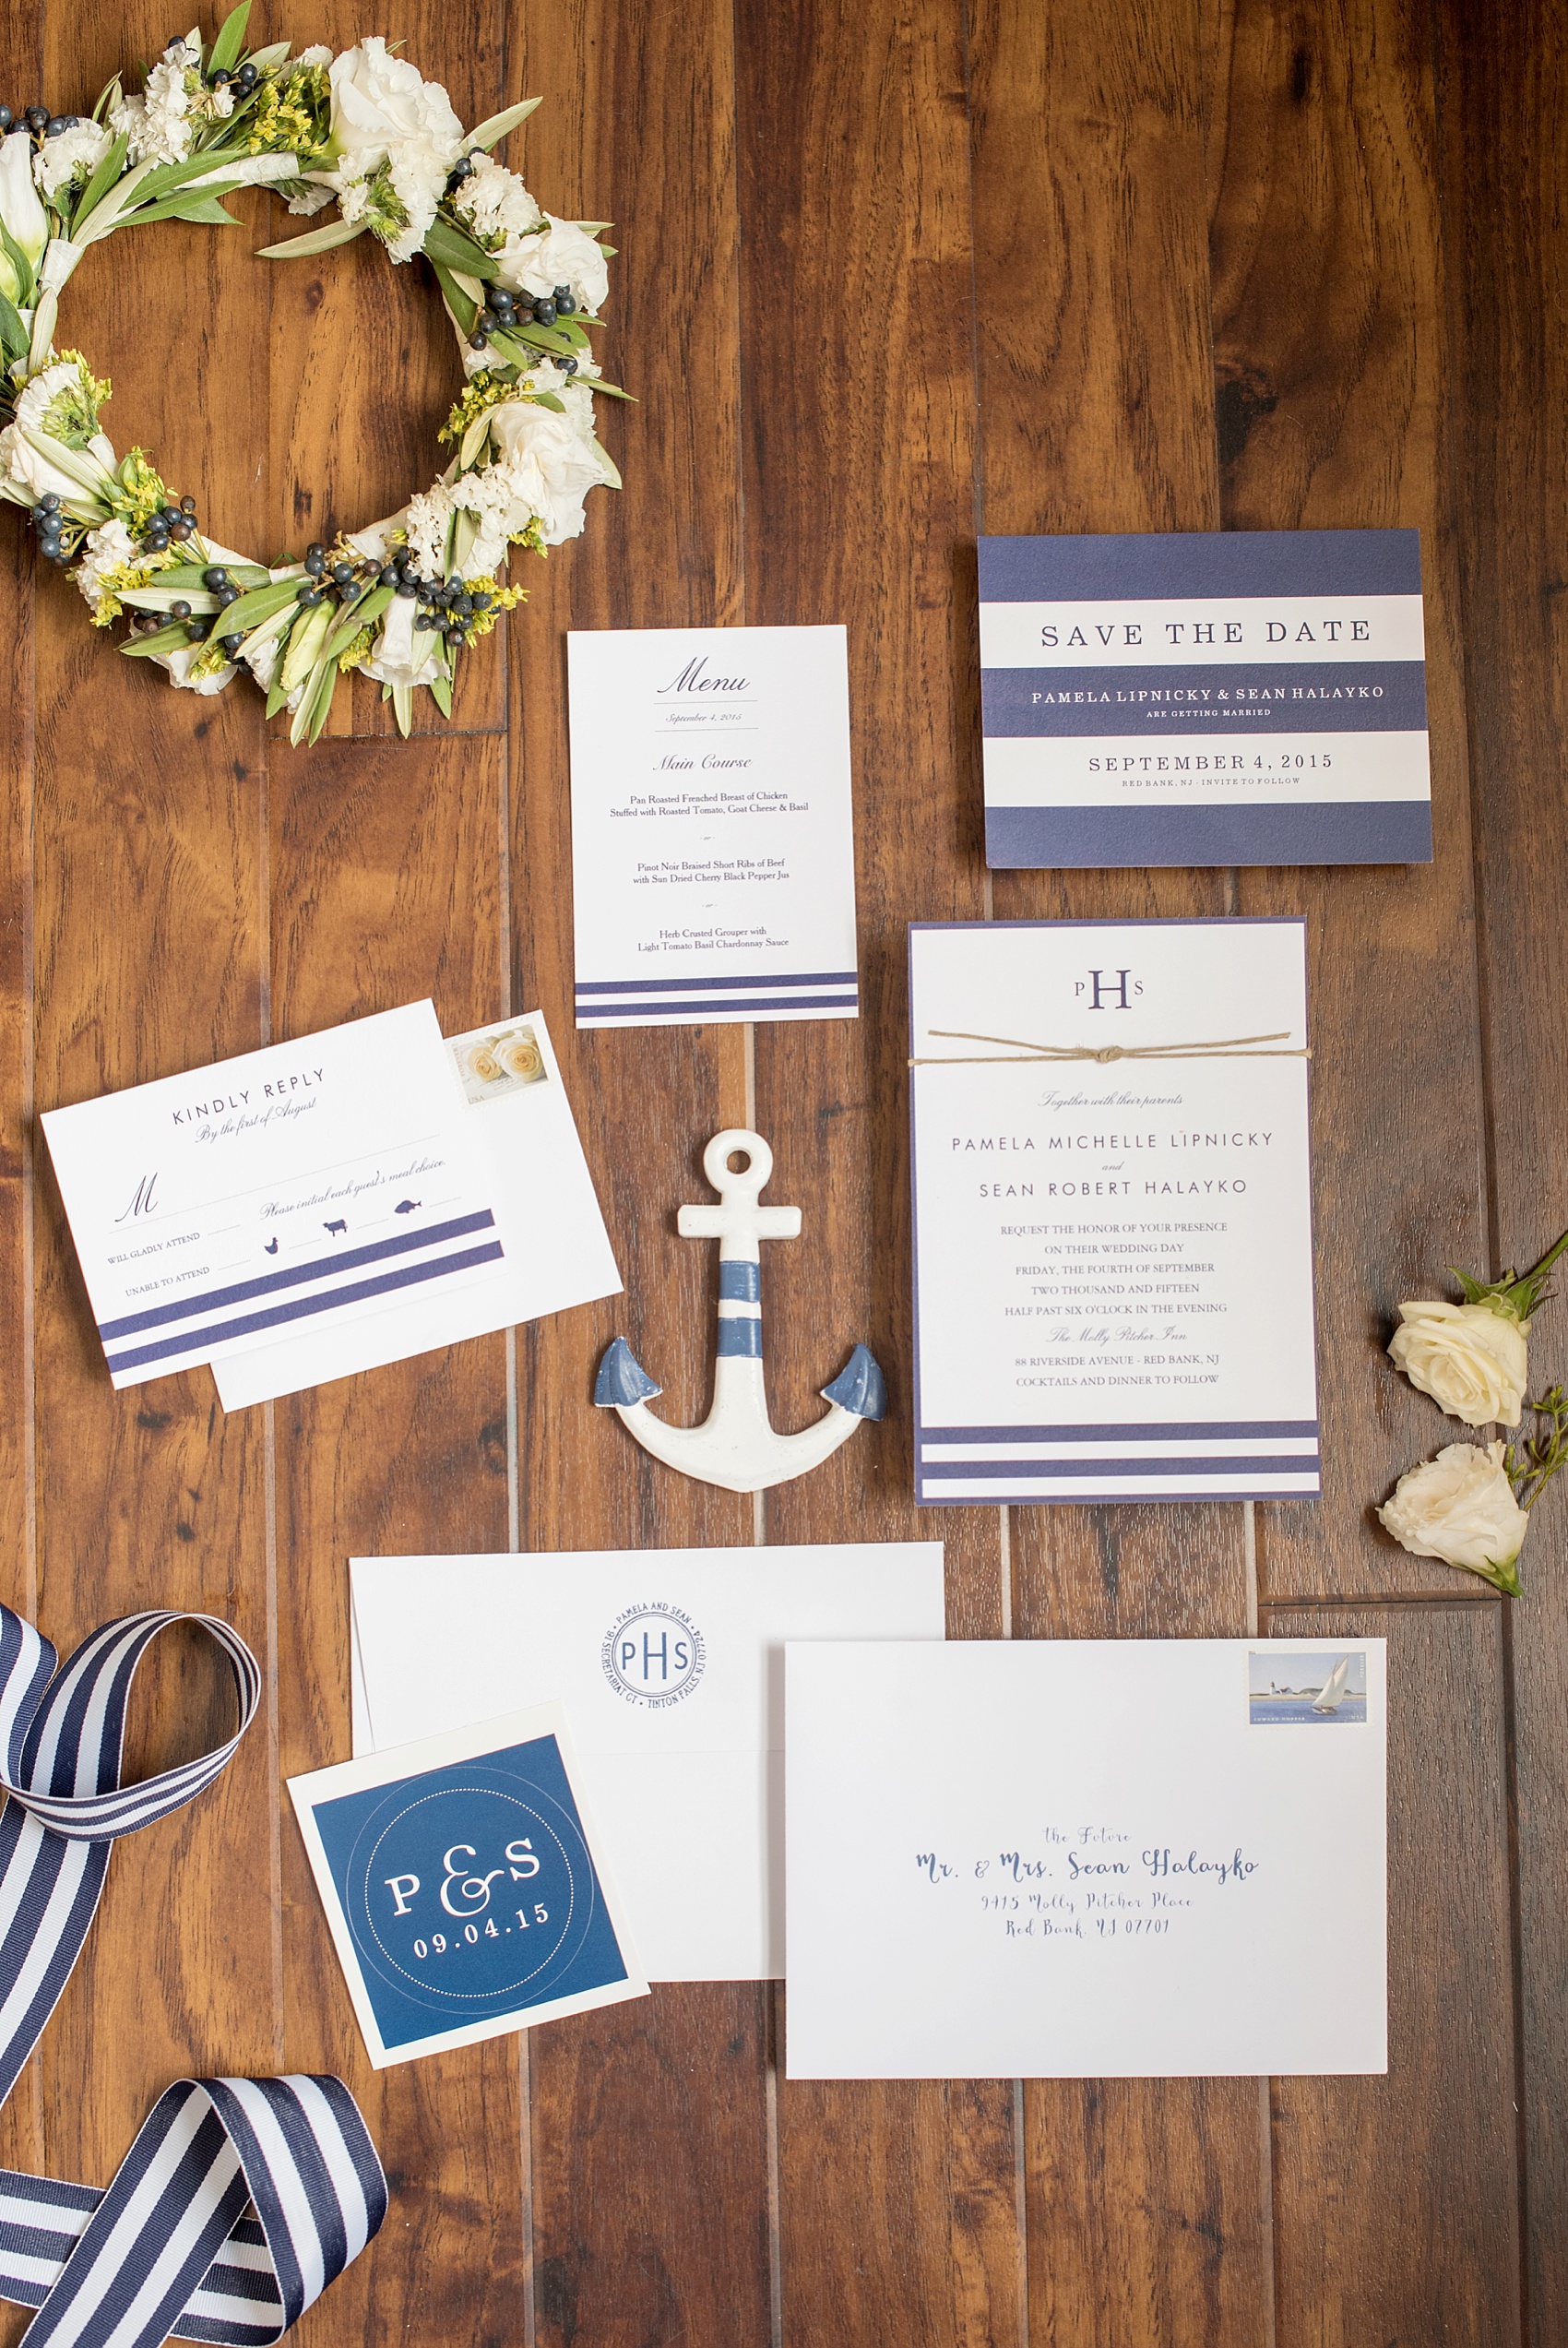 Nautical wedding invitation suite. Photo by Mikkel Paige Photography. Navy blue and white color palette.